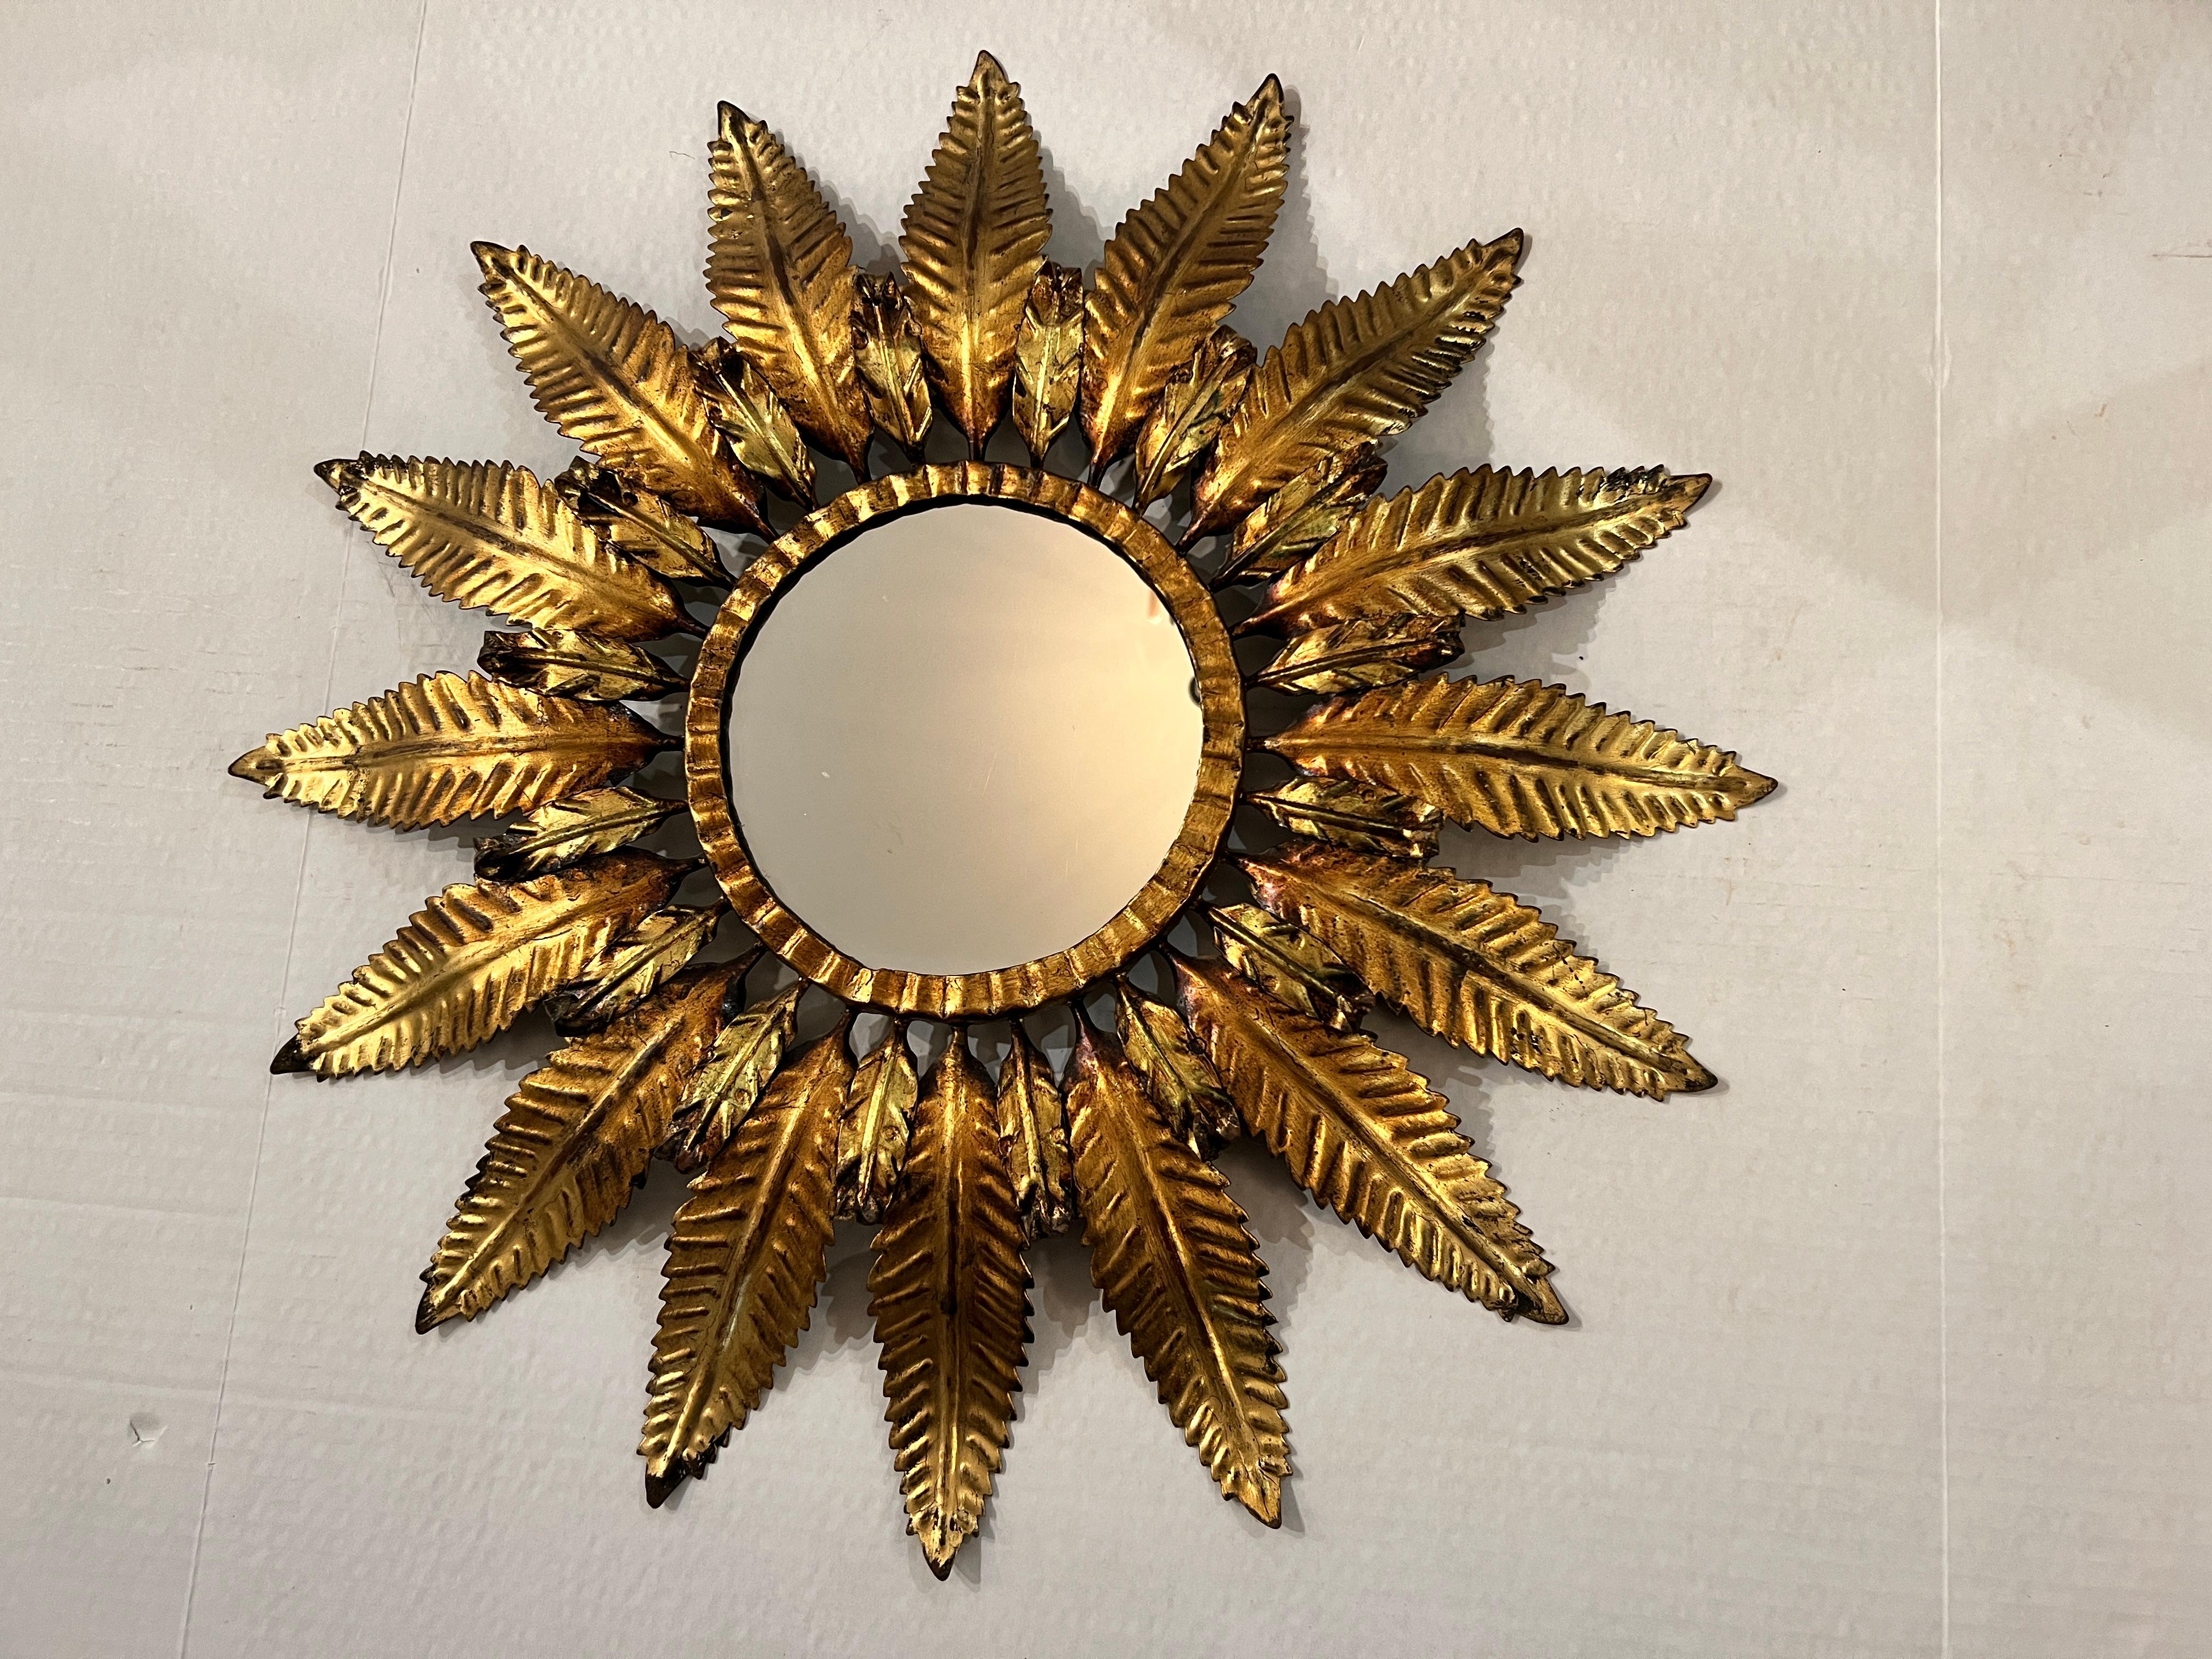 A 1940s French Gilt Metal Sunburst Mirror is a vintage mirror with a radiant design, featuring a sunburst-like frame made of gold-colored metal.
